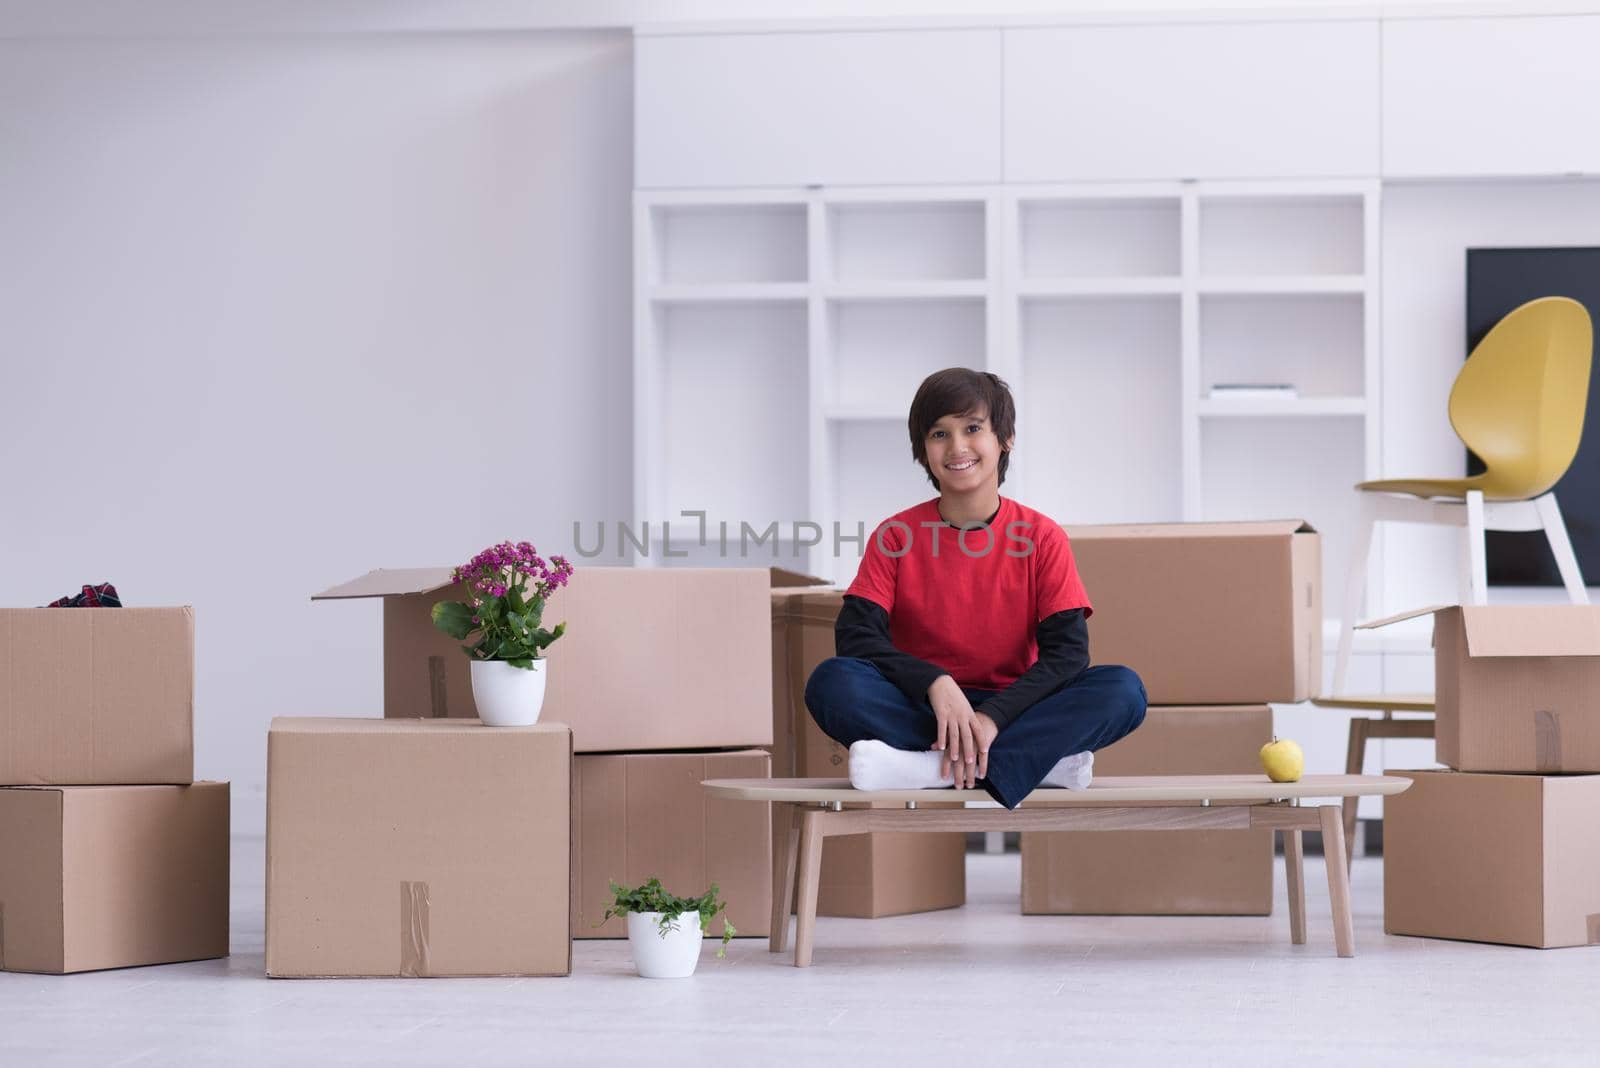 happy little boy sitting on the table with cardboard boxes around him in a new modern home